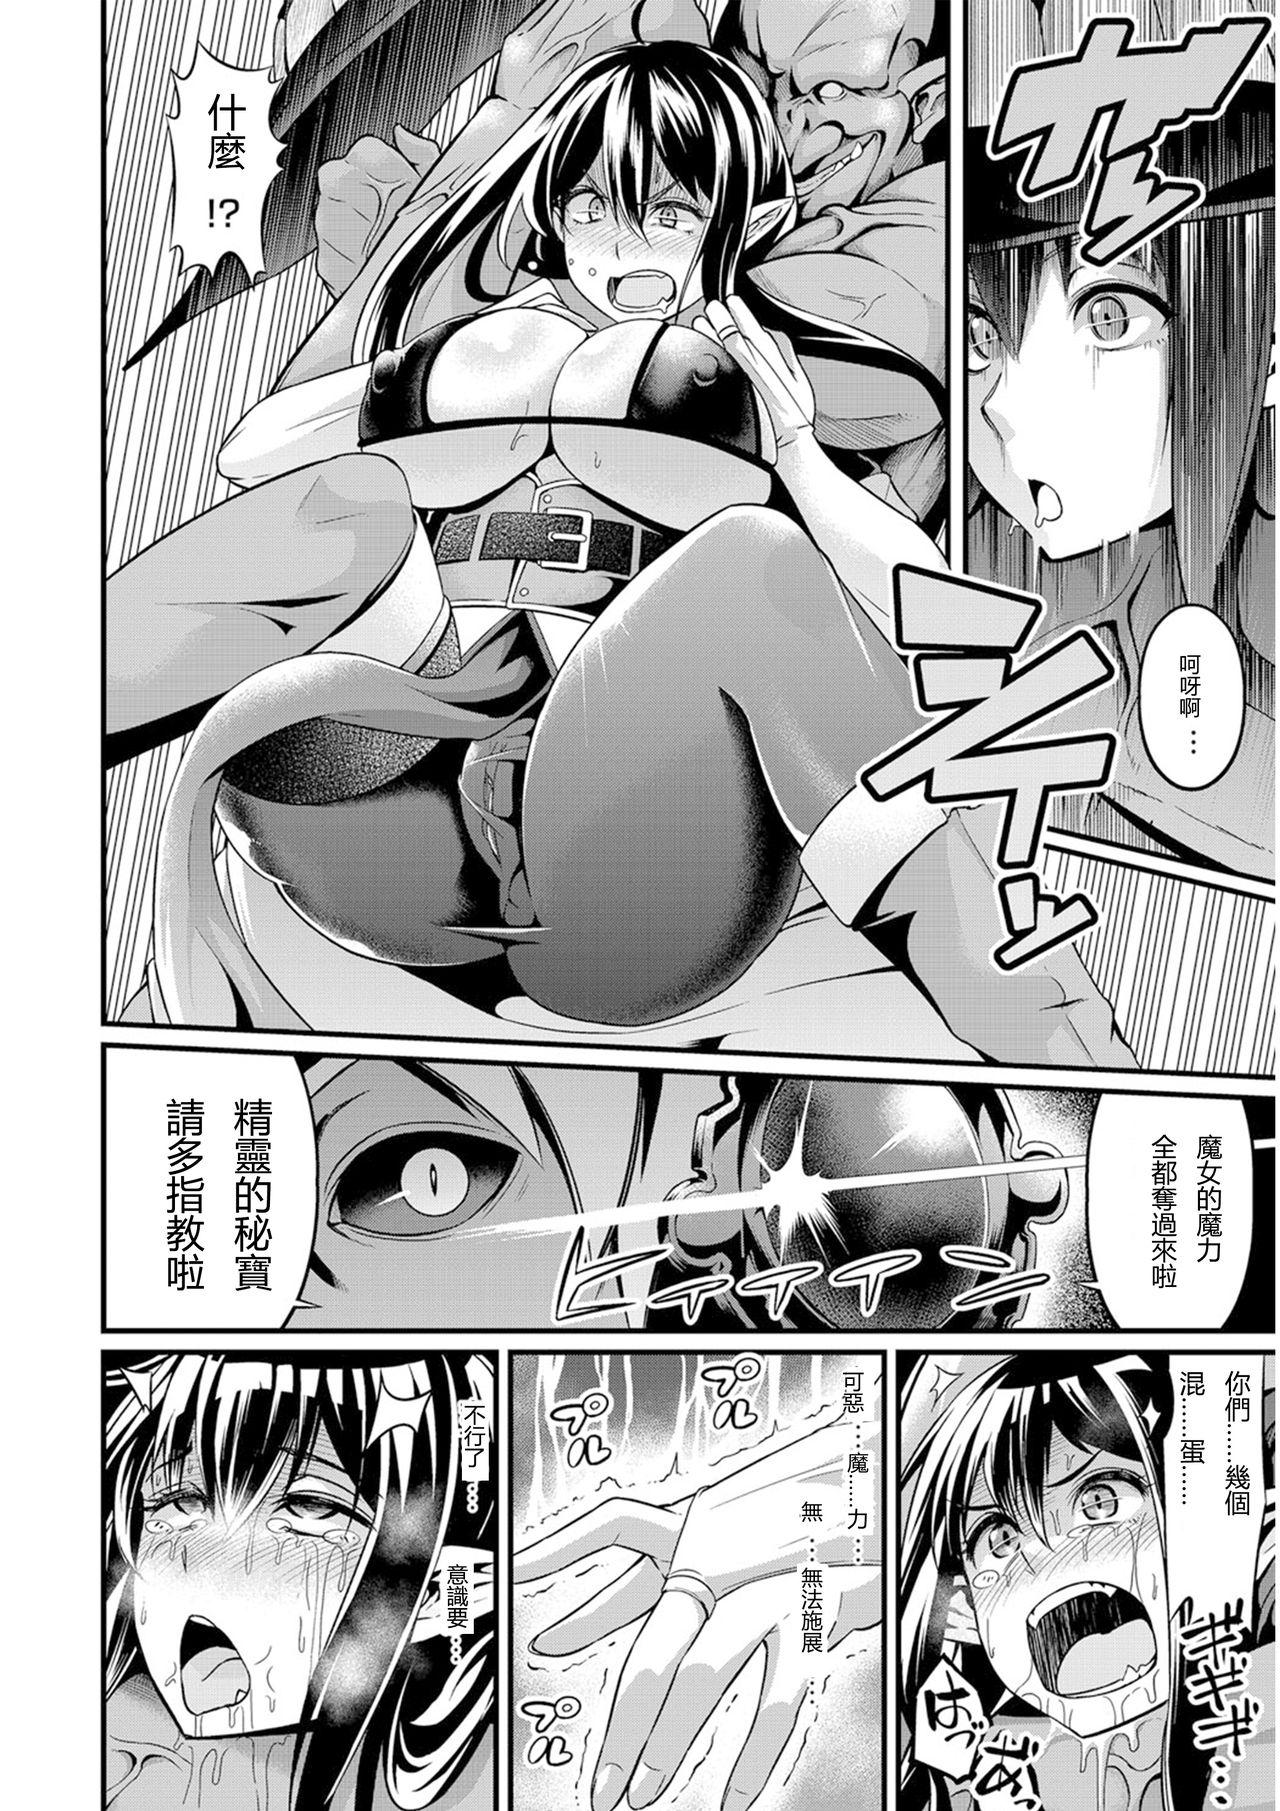 18 Year Old Witch down strike | 魔女墮落 Ballbusting - Page 6